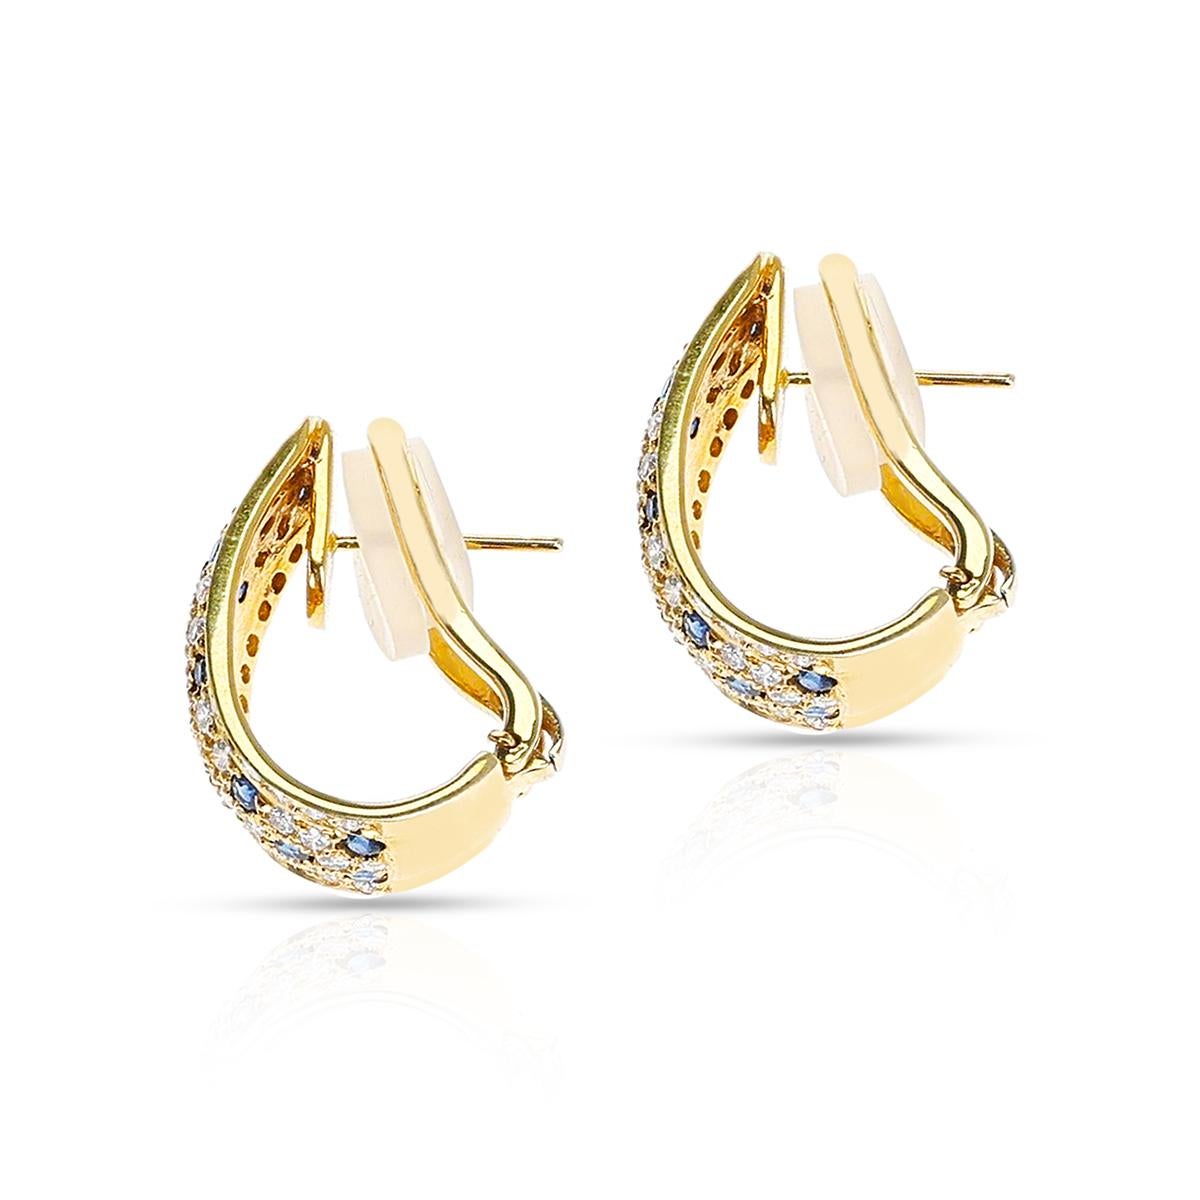 A pair of Half-Hoop Round Diamond and Round Sapphire Earrings with 18 Karat Yellow Gold. The diamond weight is appx. 1.60 carats and the weight of the sapphires is appx. 1.50 carats. The total weight of the earrings is 17.05 grams. The length of the